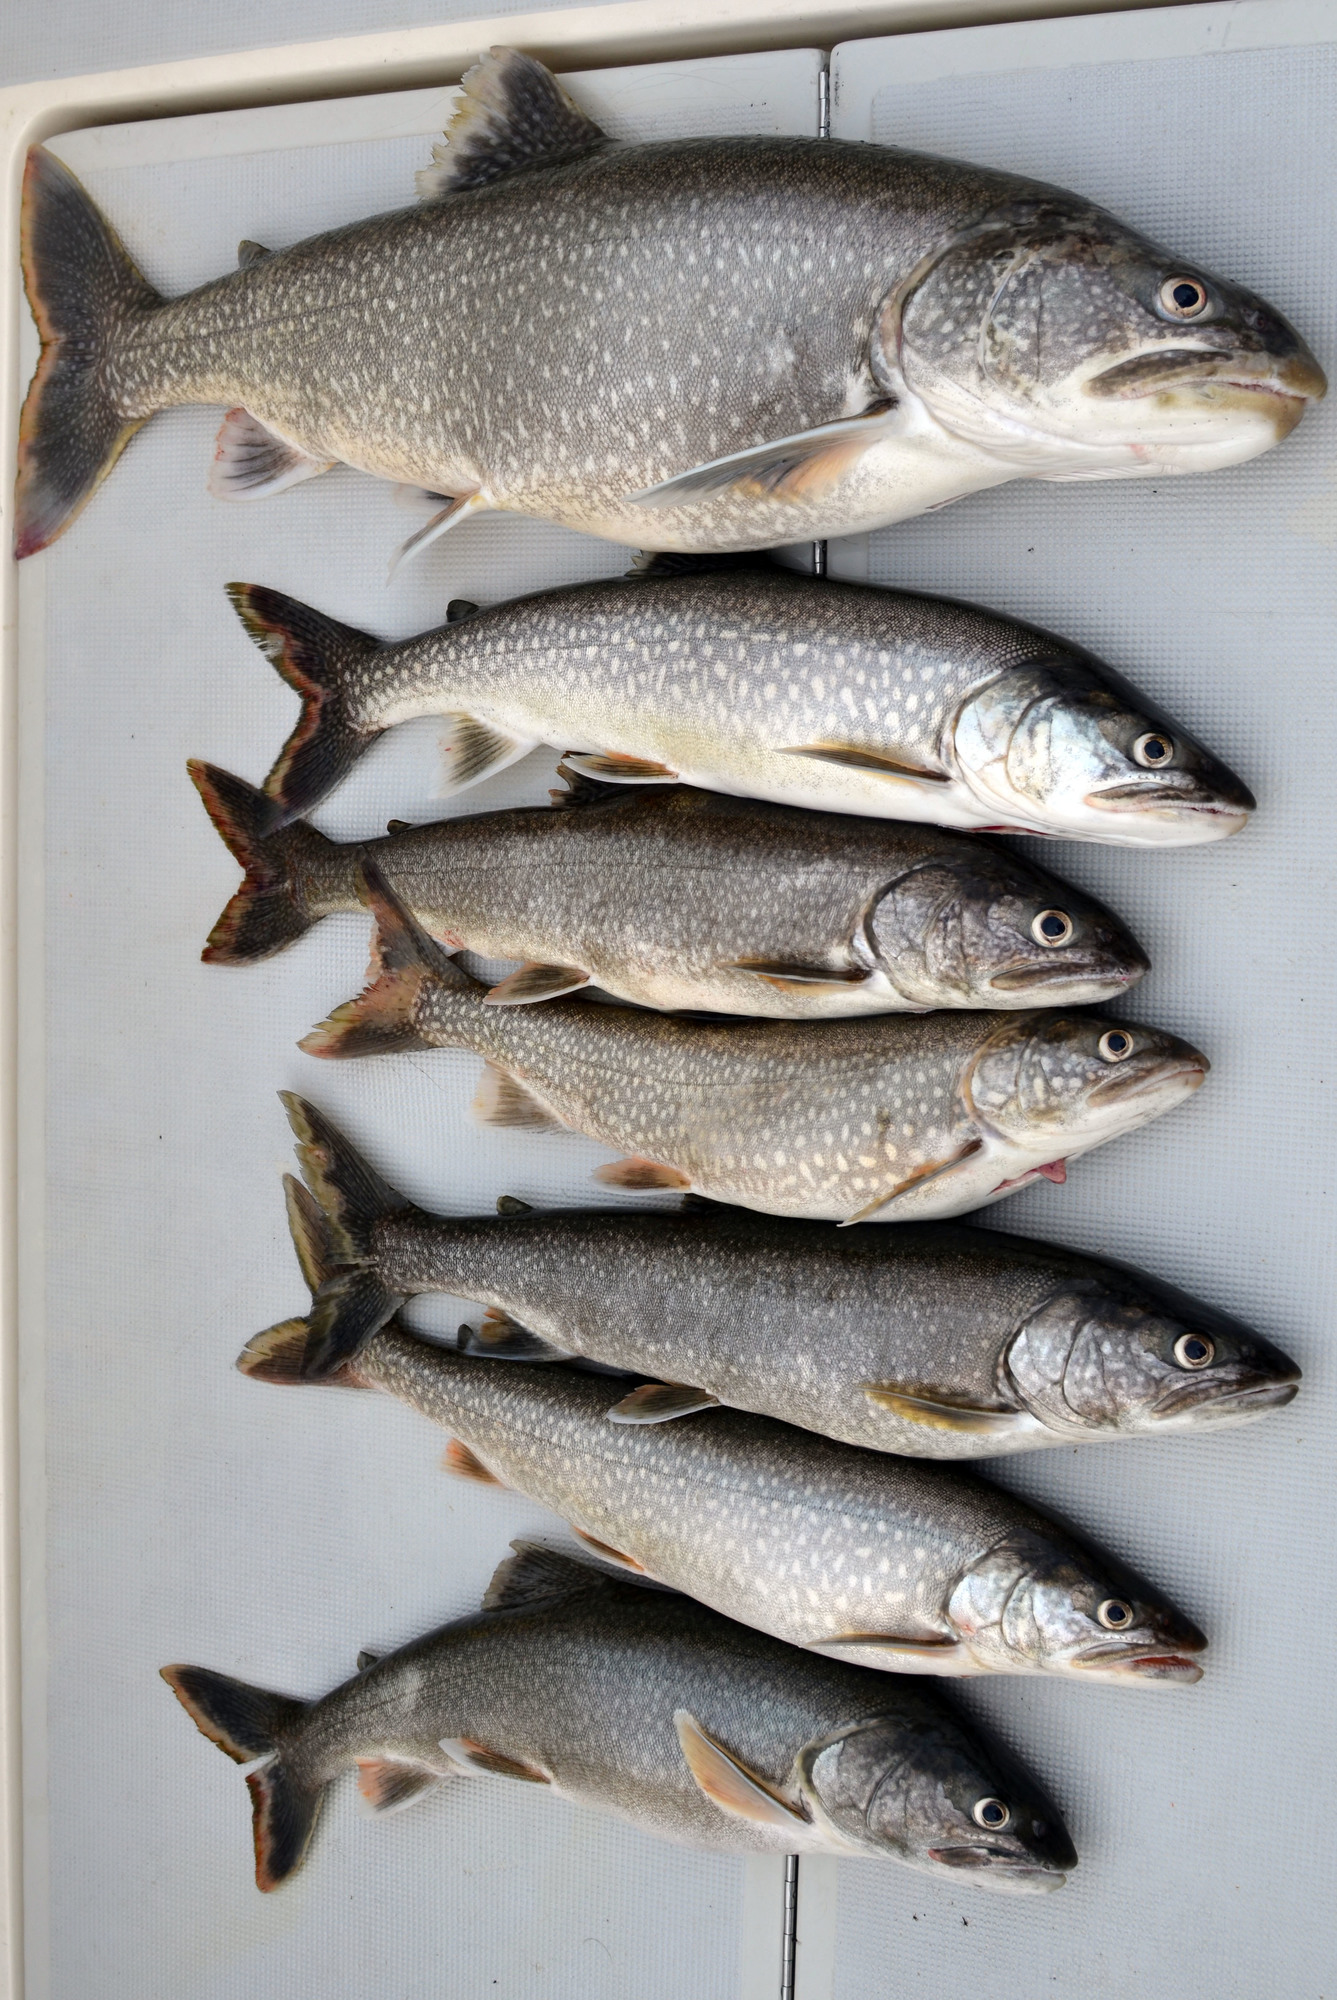 Lake trout rely on the spawning habitat of Buffalo Reef, which is threatened with stamp sands, which are covering the reef.